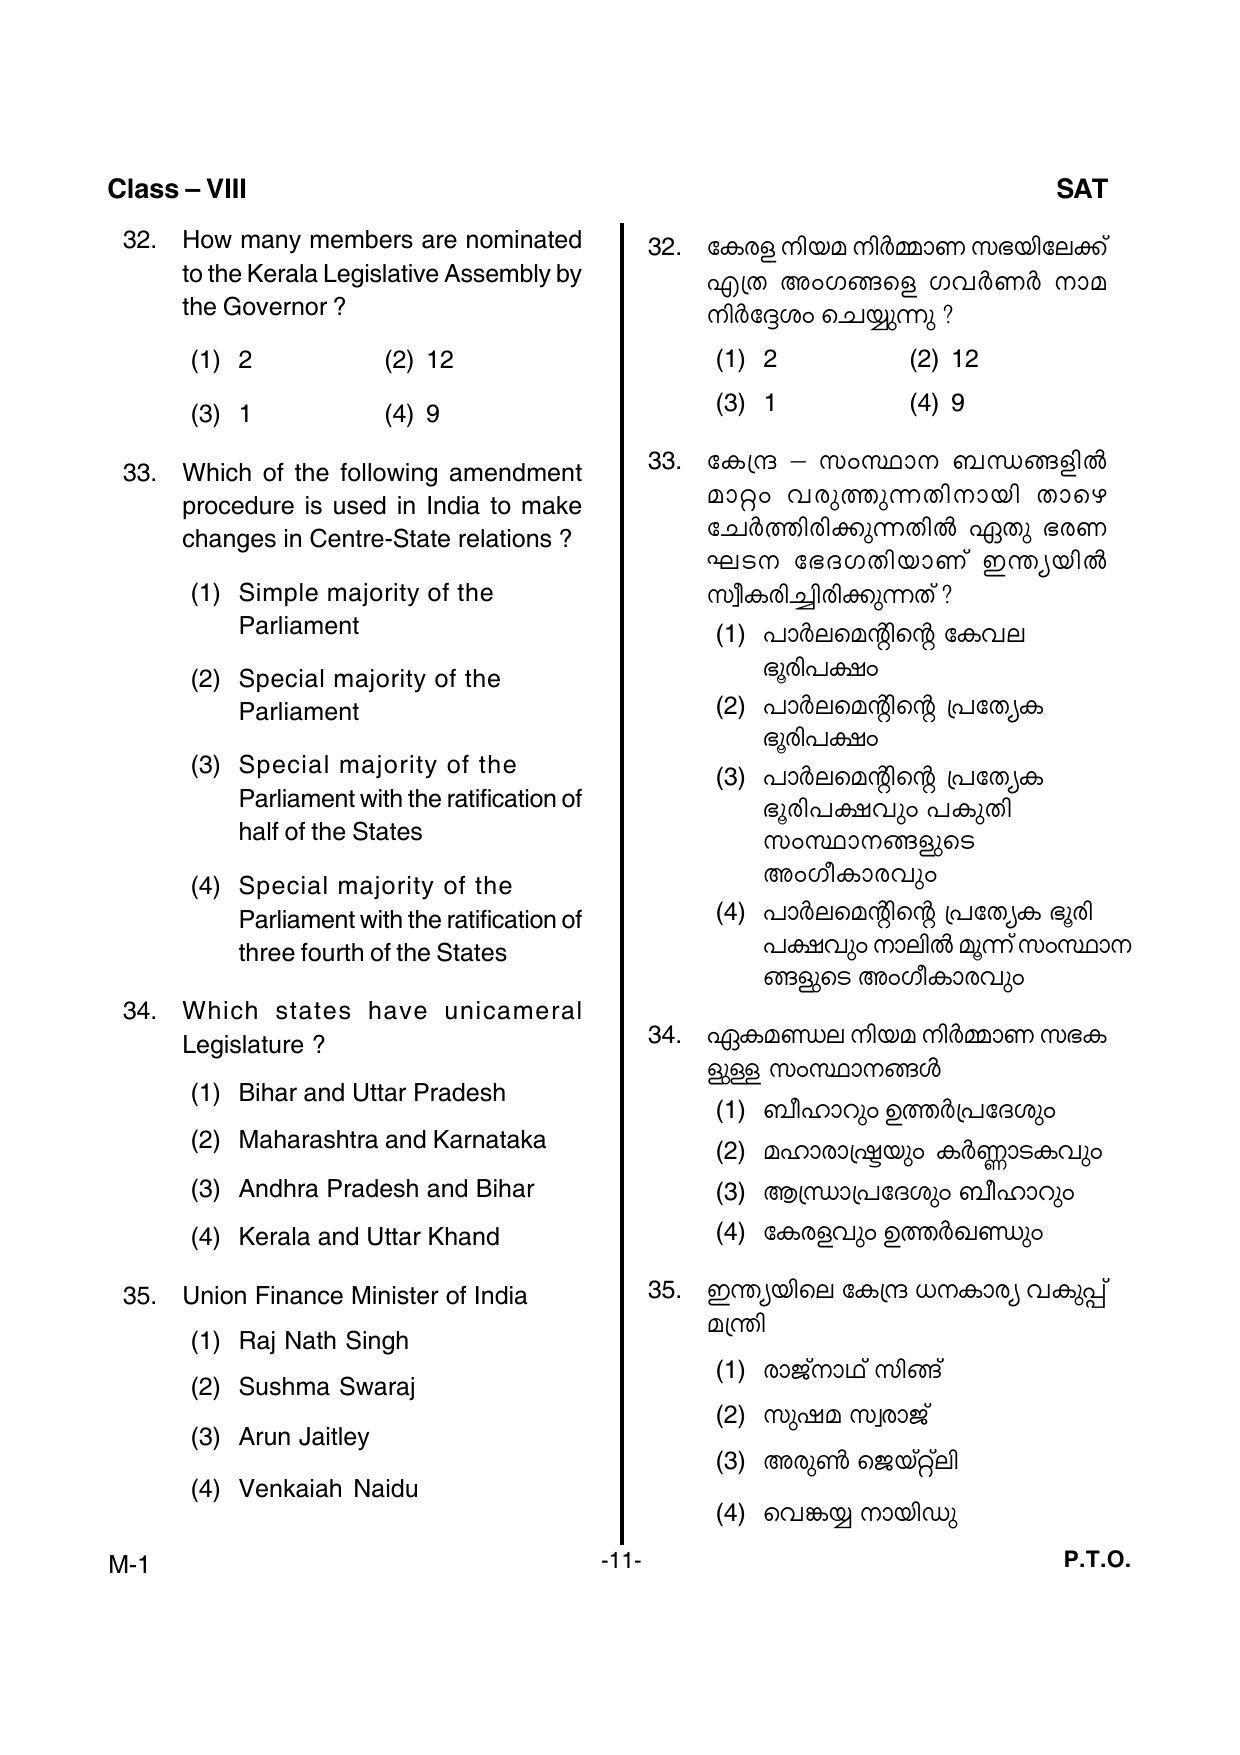 MAT 2016 Class 8 Kerala NMMS Question Papers - Page 13